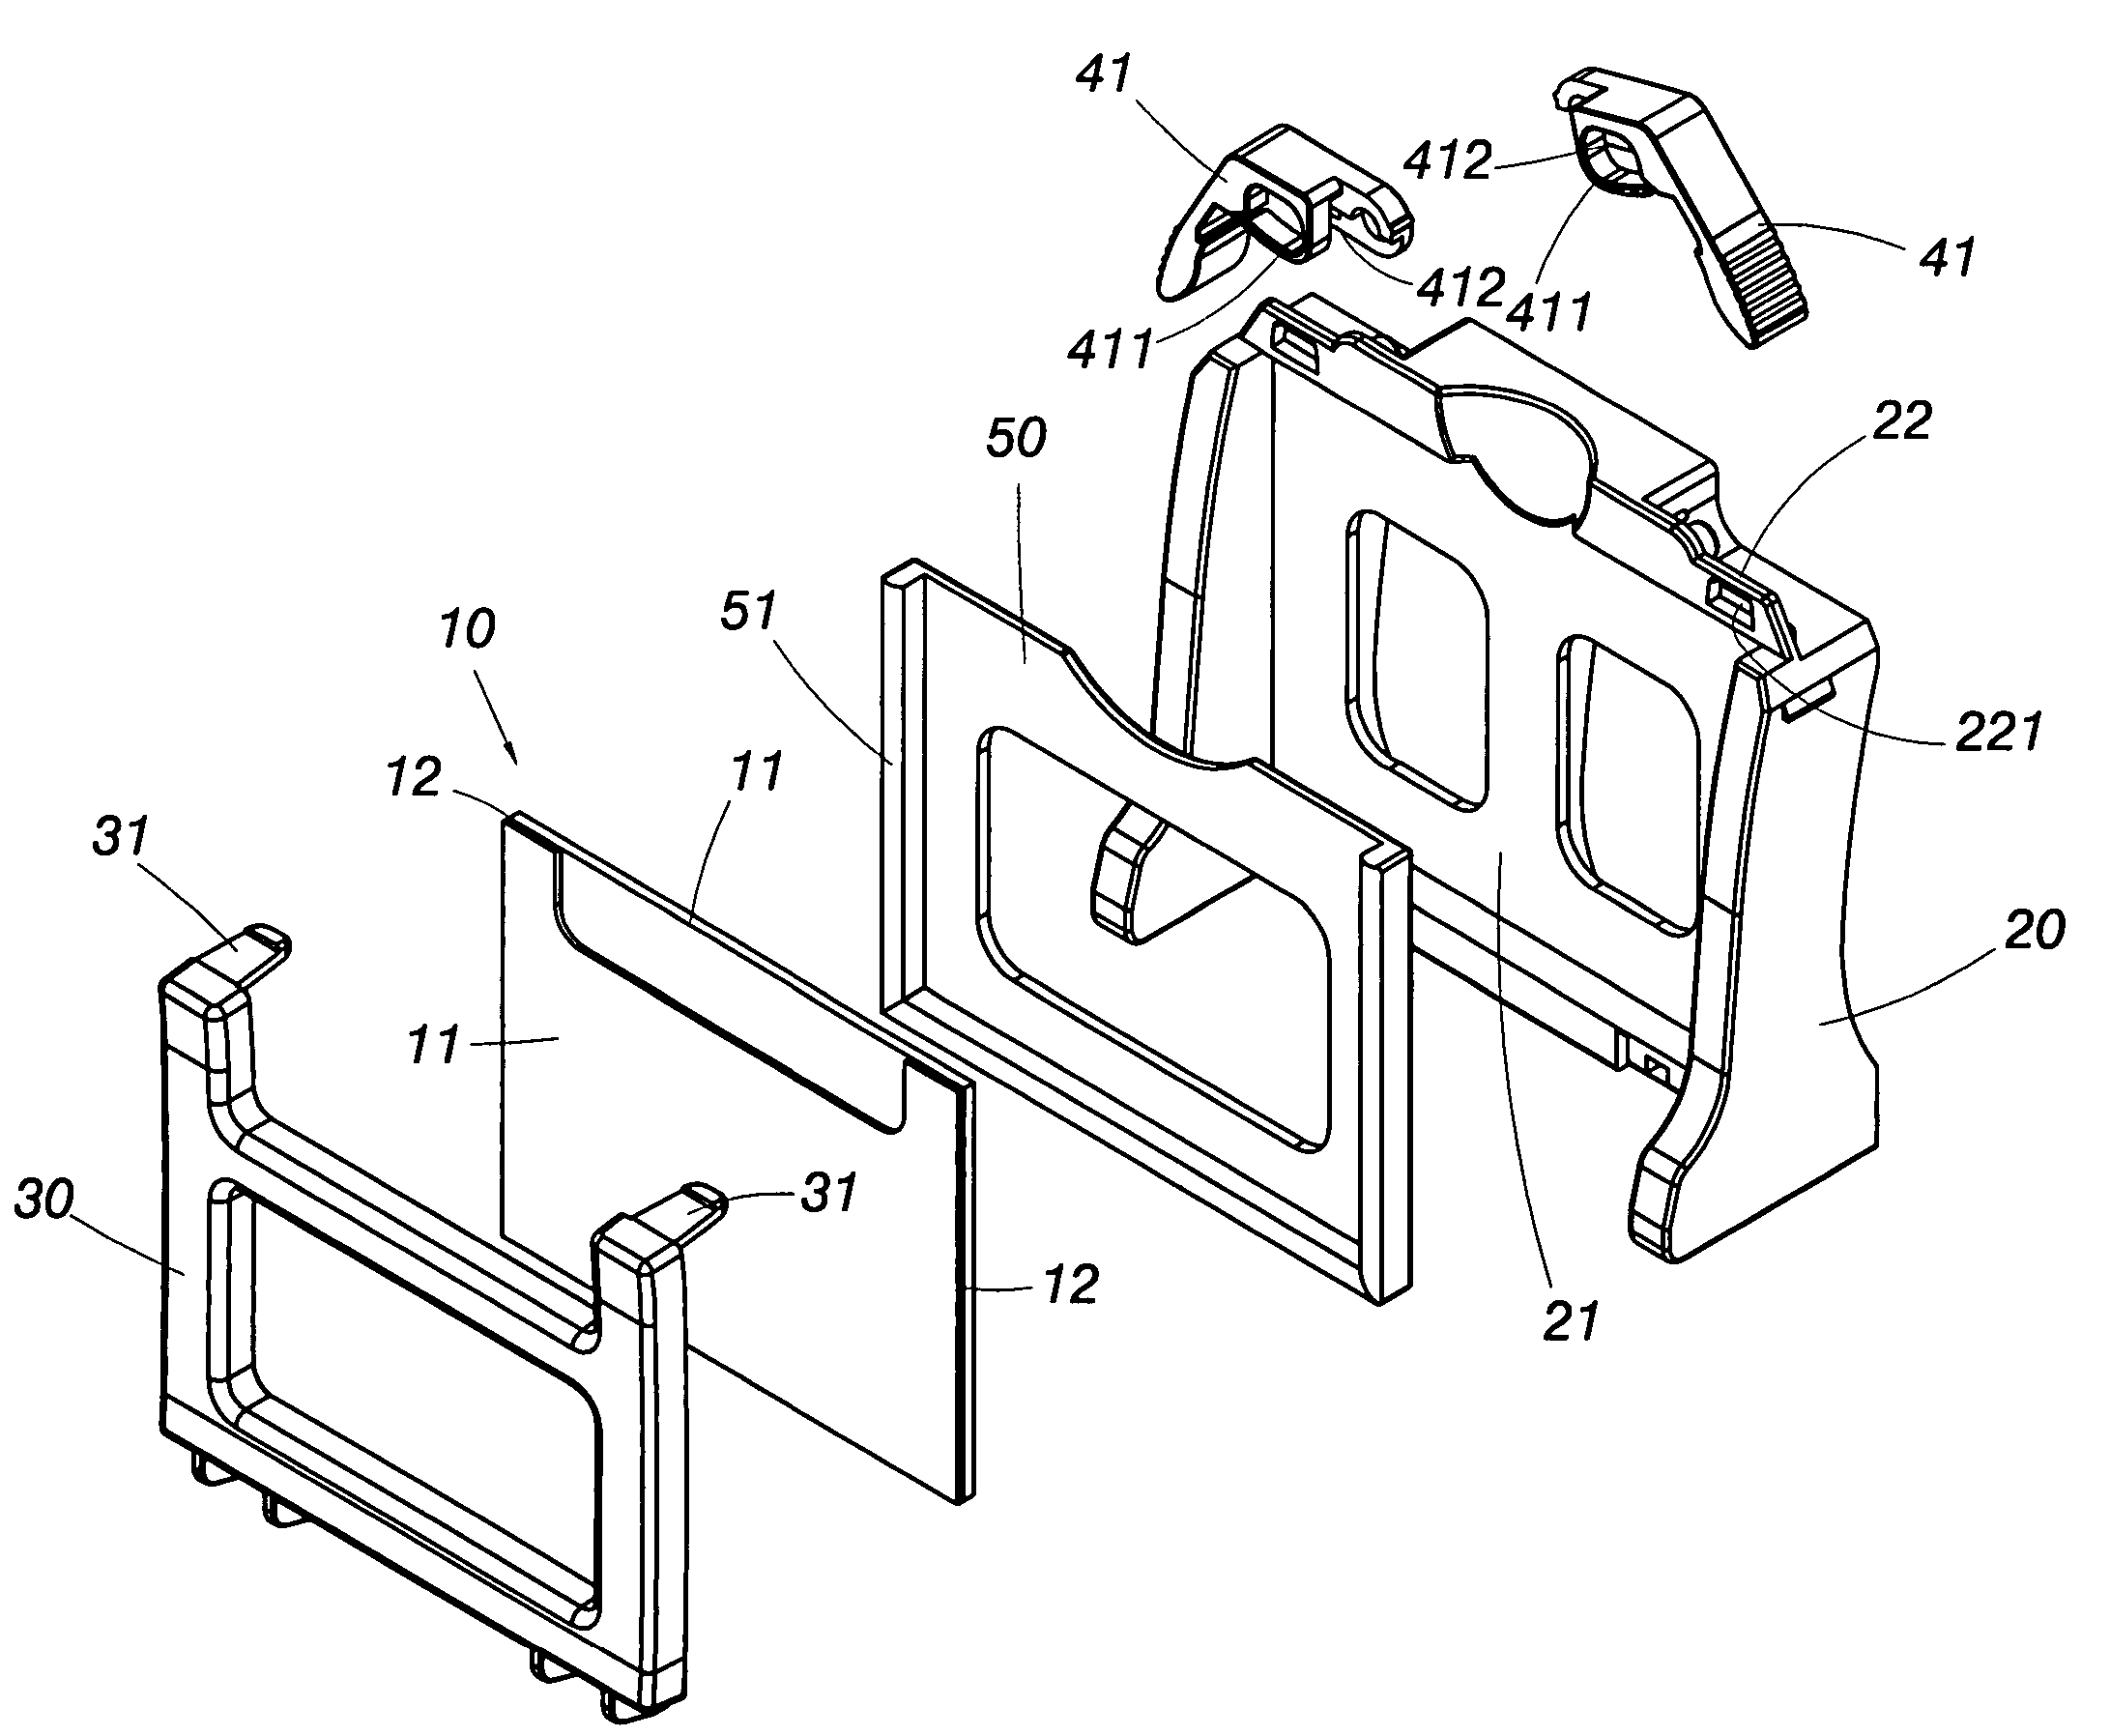 Gel casting module and electrode module of an electrophoresis device